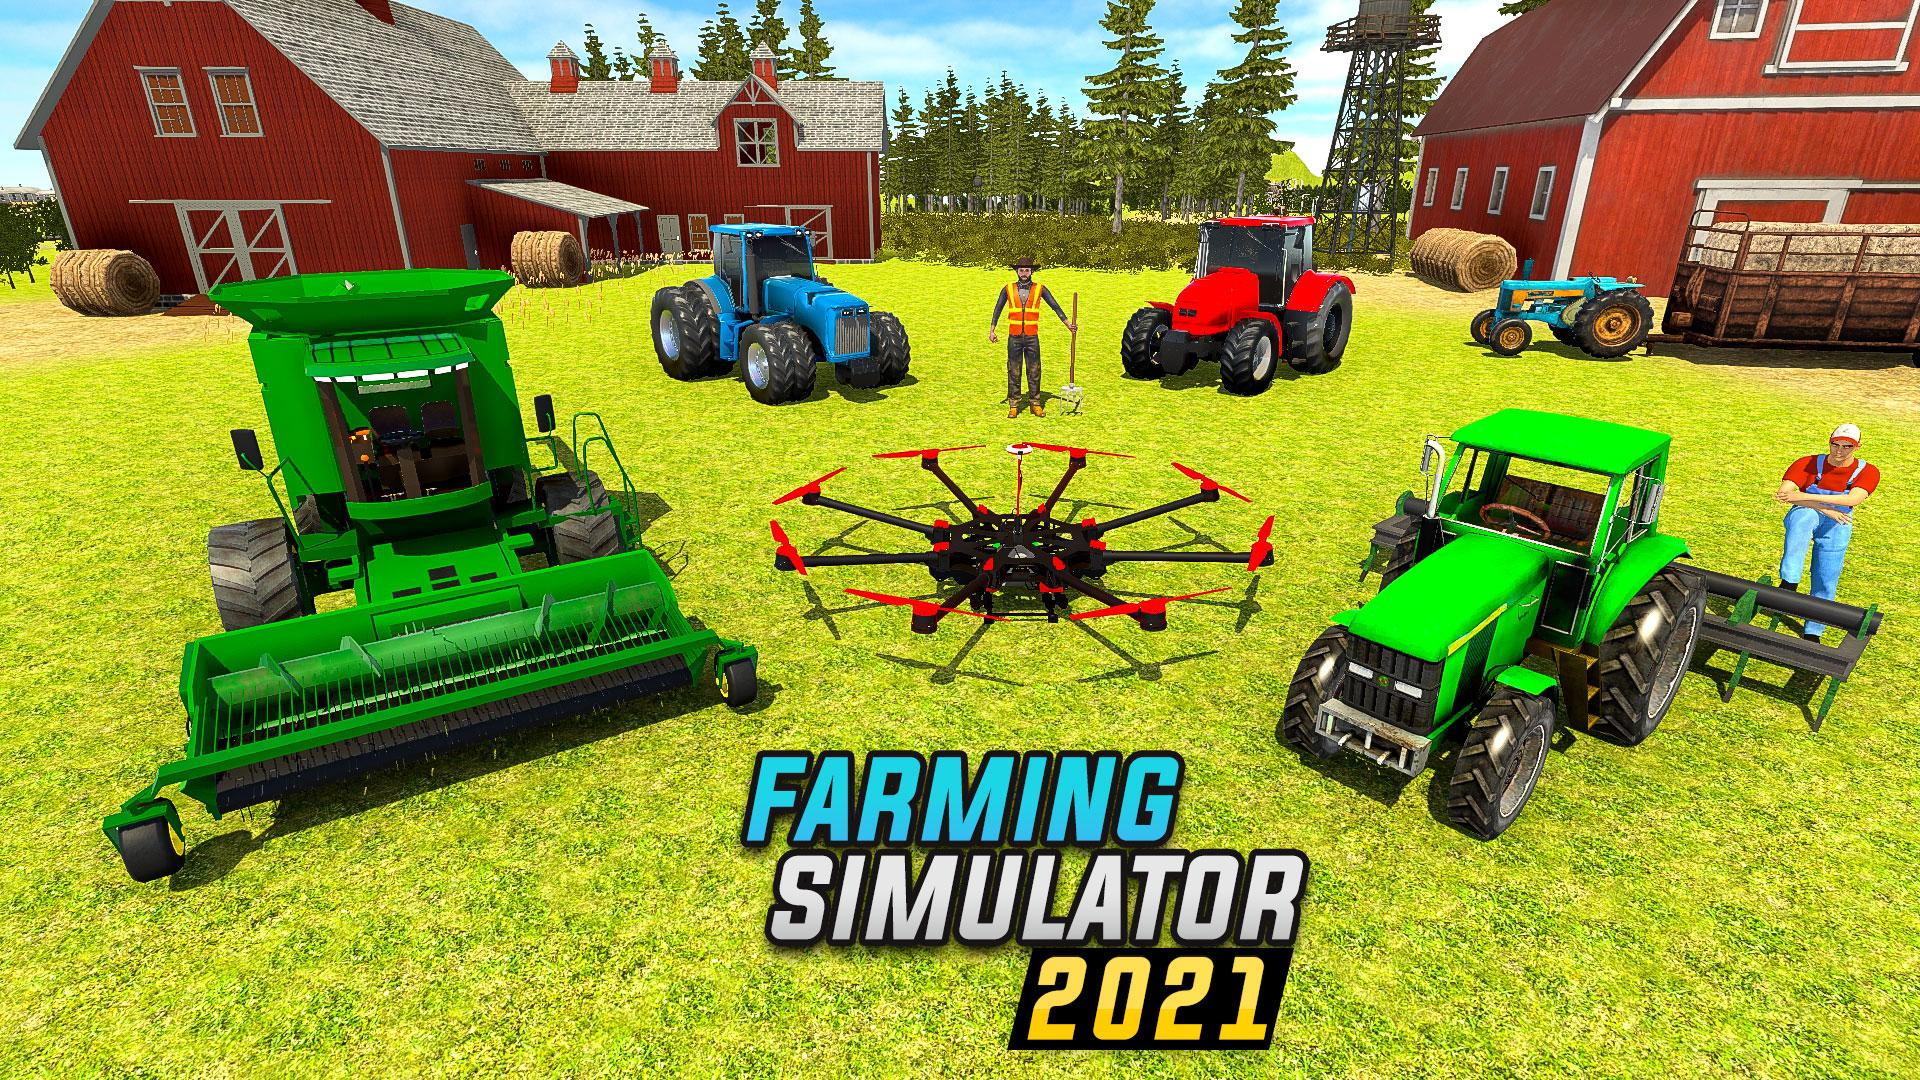 Real Farm Sim 21: Tractor Farming Simulator Game for Android - APK Download